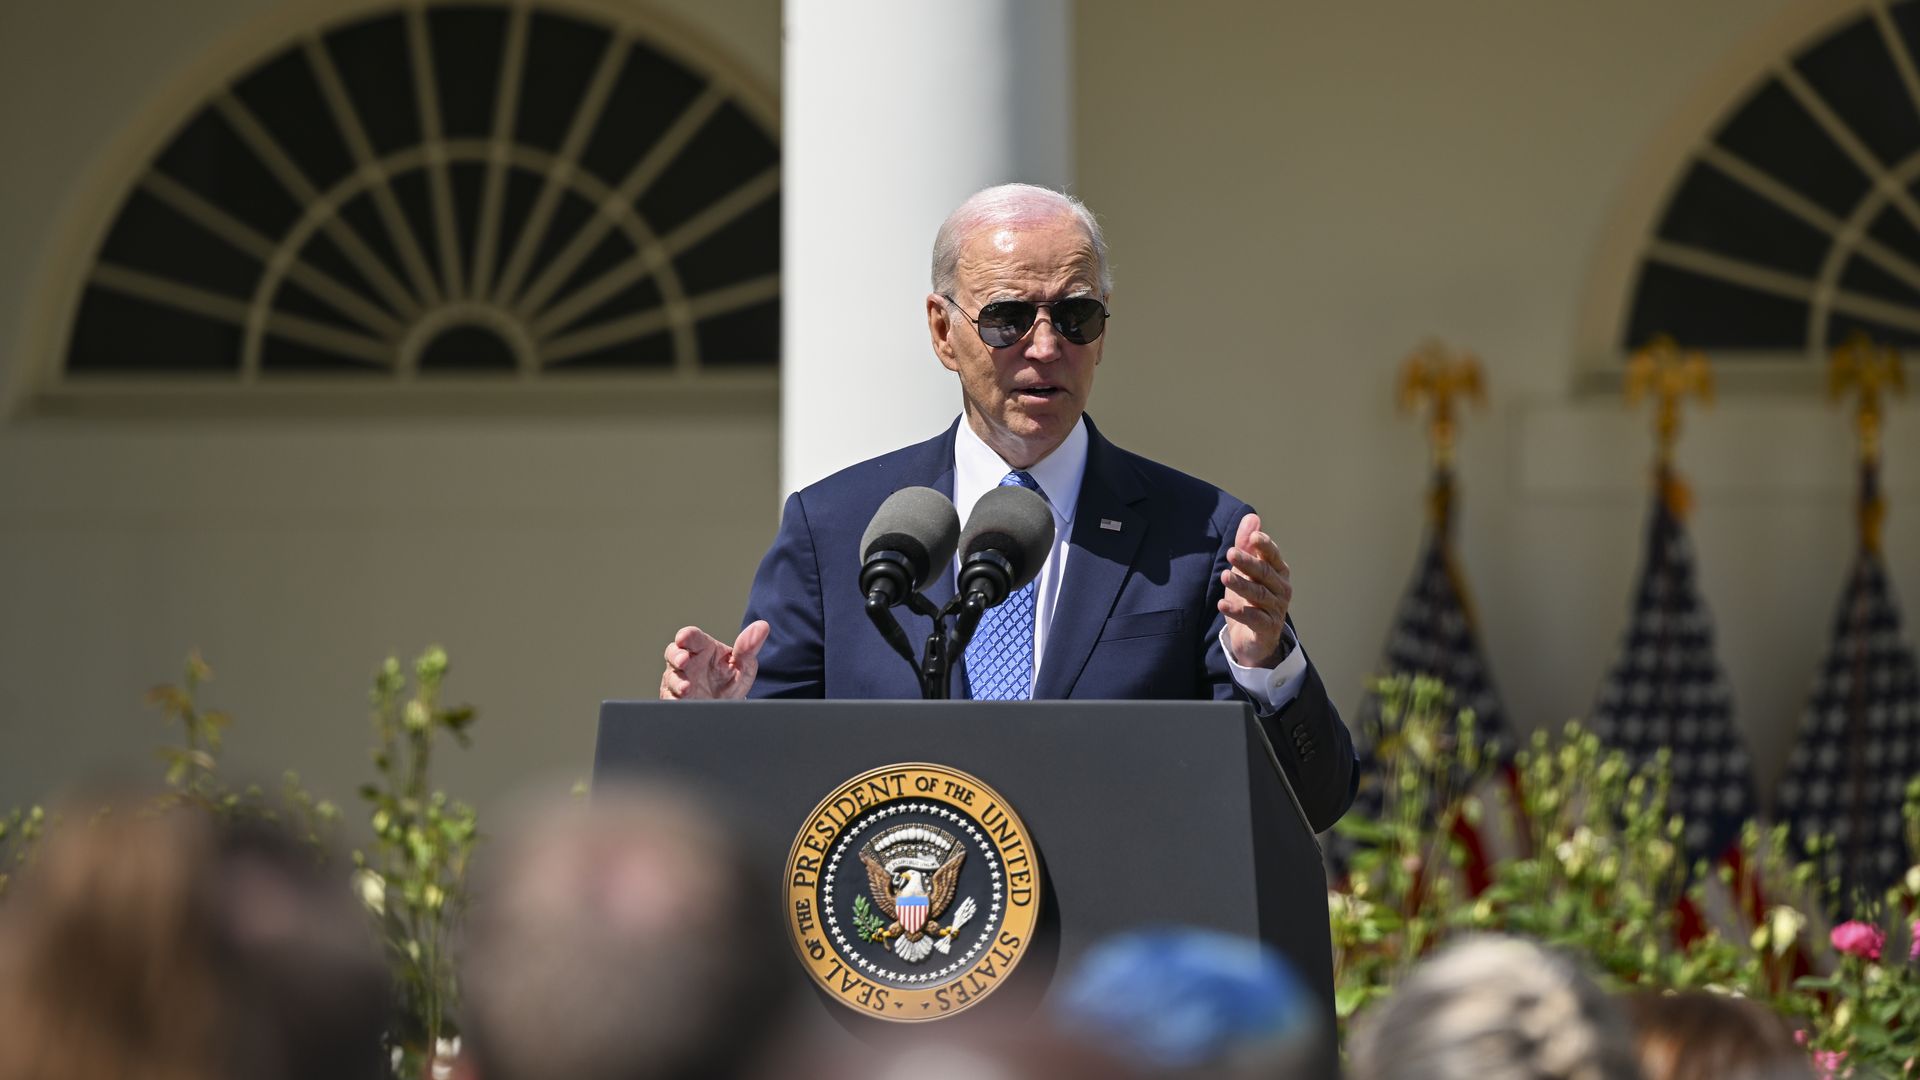 President Joe Biden, wearing a blue suit, white shirt, blue tie and aviator sunglasses, speaks to a crowd behind a podium in the White House rose garden.